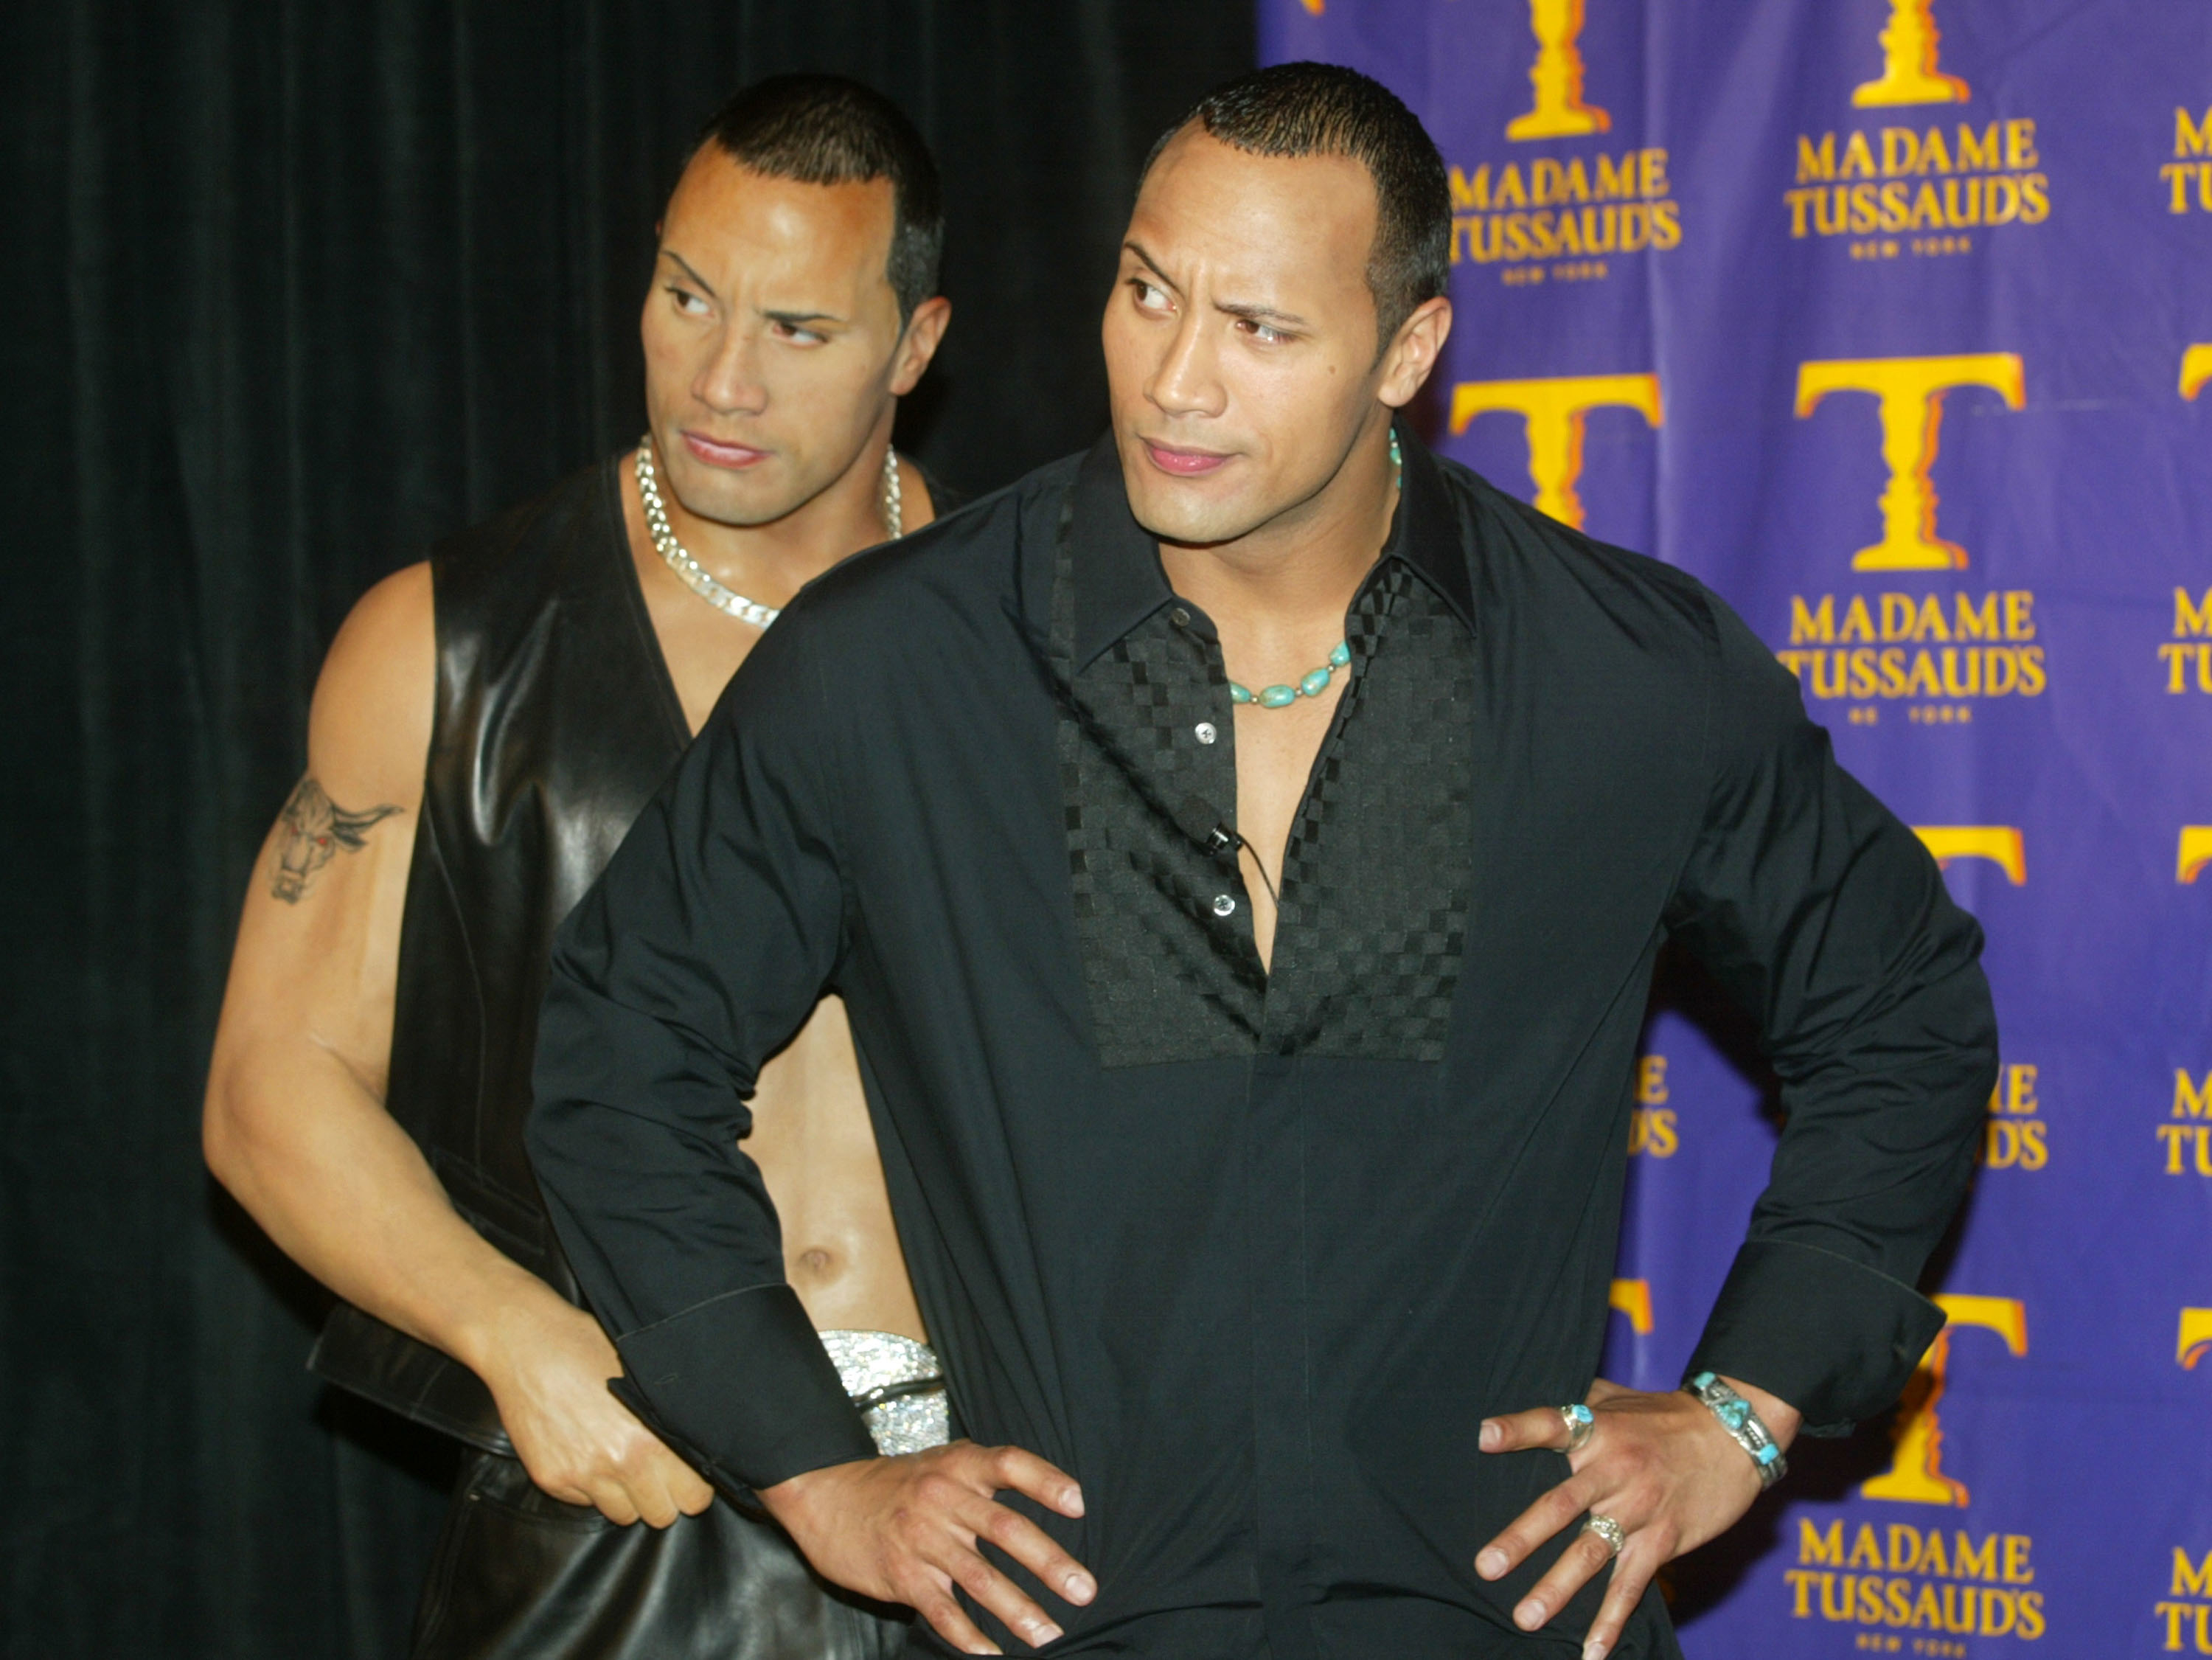 Close-up of Dwayne with his Tussauds wax figure, both with an eyebrow raised